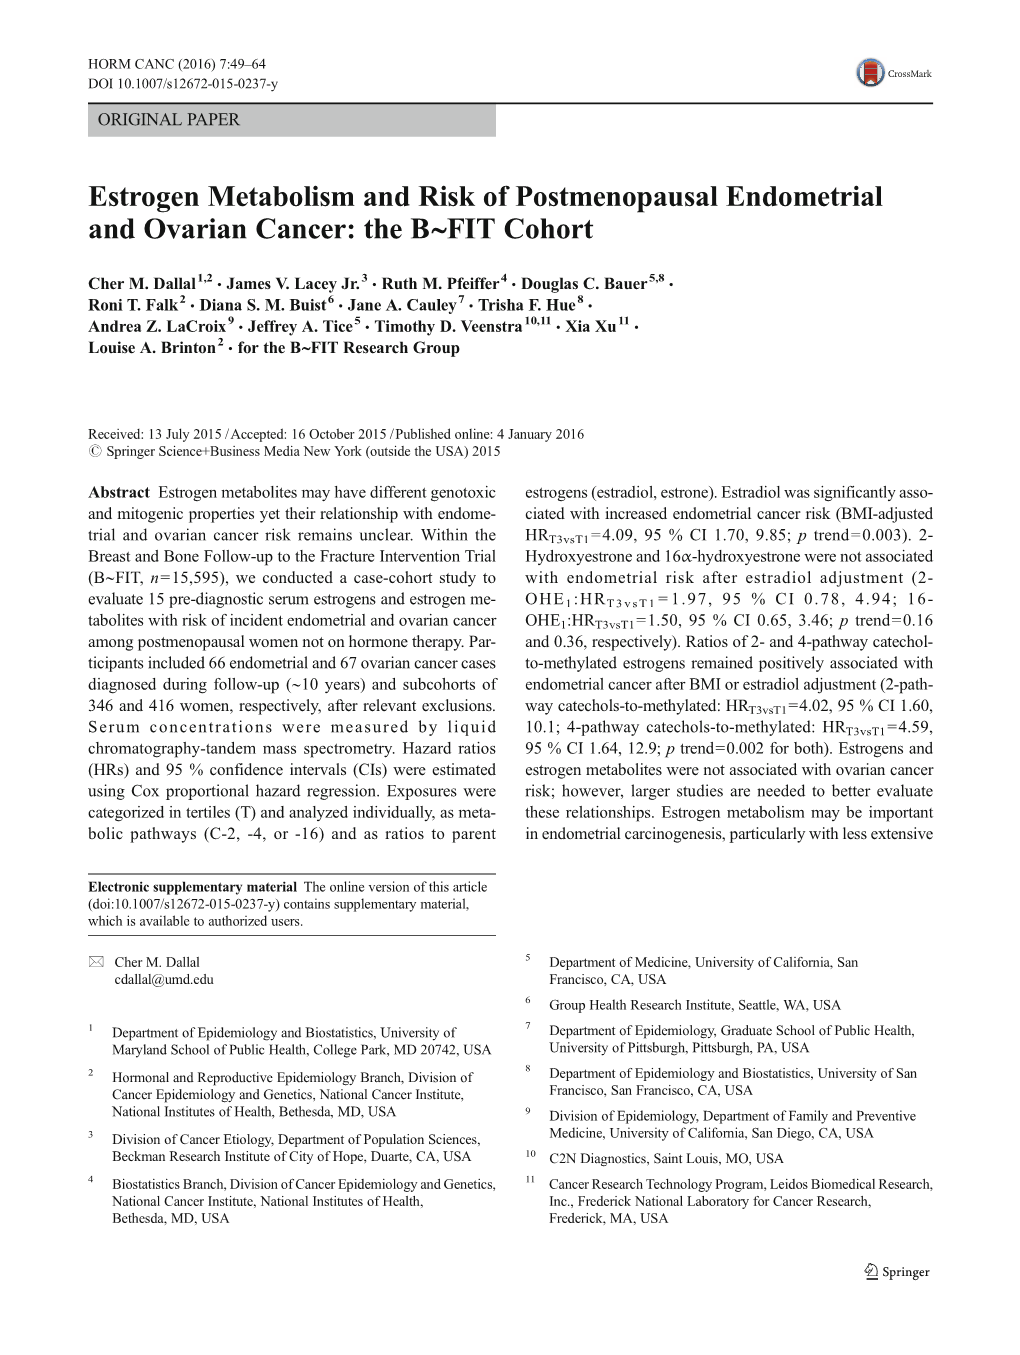 Estrogen Metabolism and Risk of Postmenopausal Endometrial and Ovarian Cancer: the B∼FIT Cohort